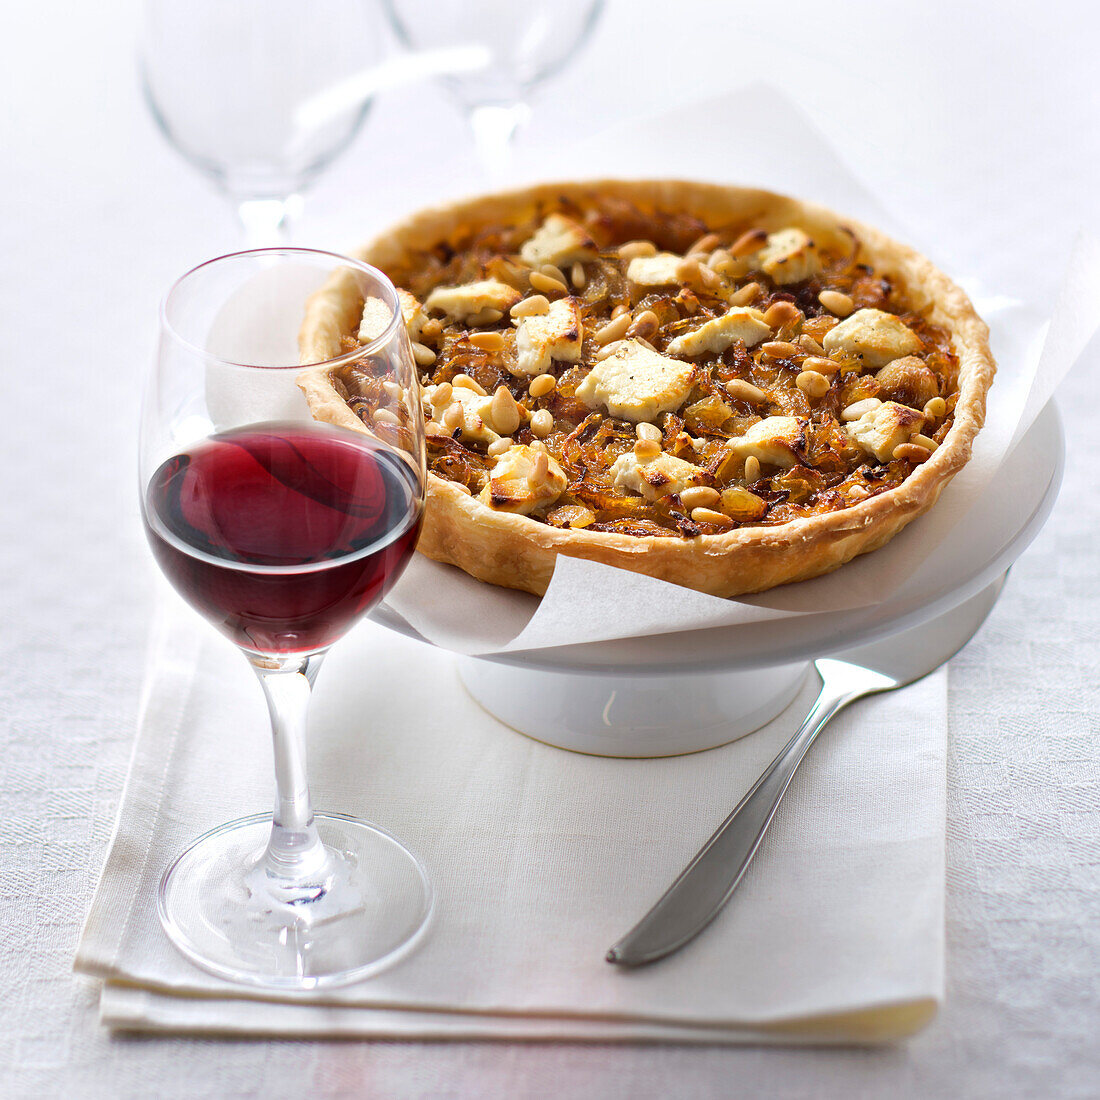 Tart with onion confit, pine nuts and goat cheese, served with a glass of red wine